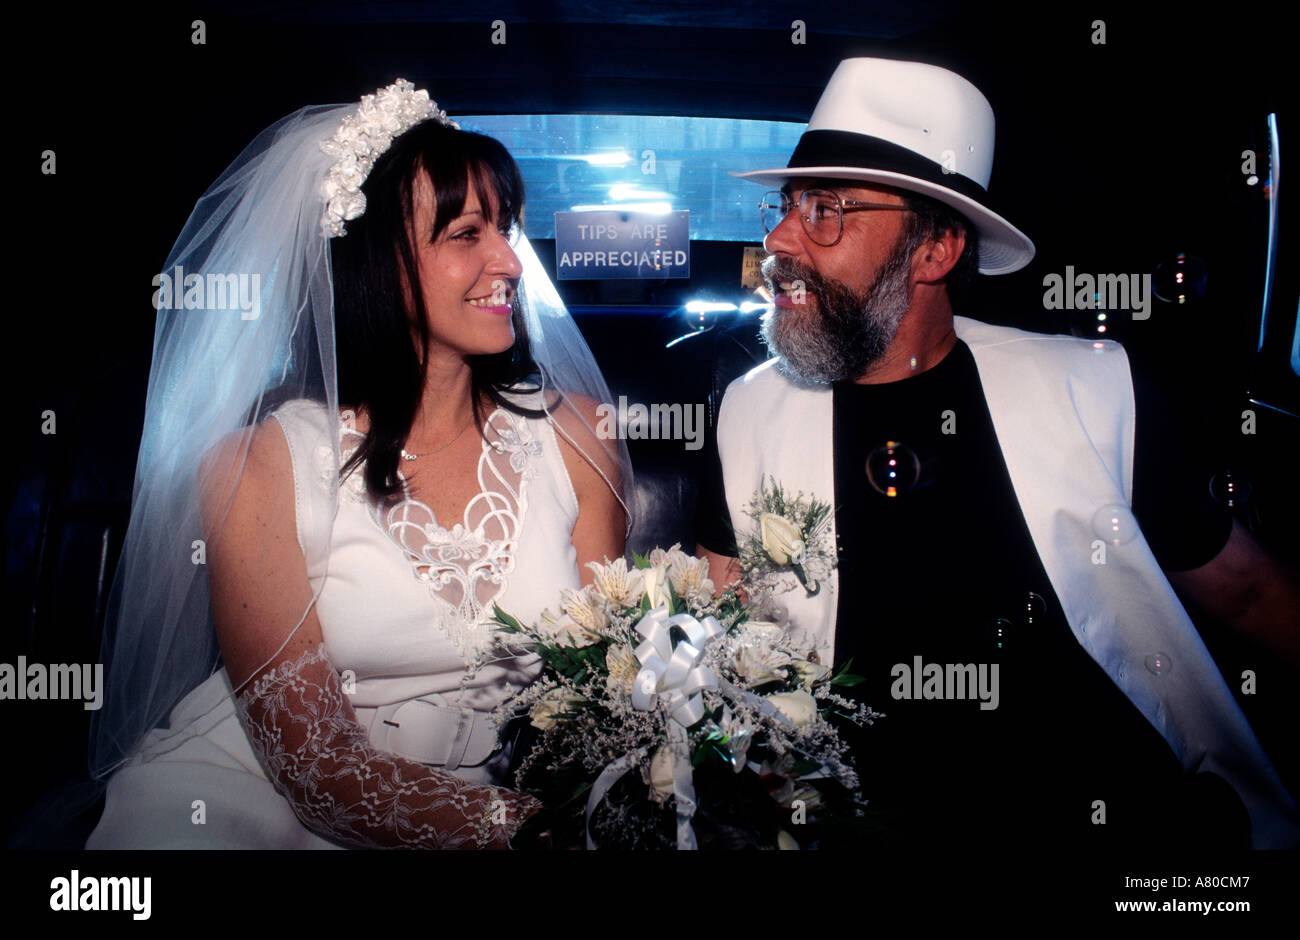 United States, Nevada, Las Vegas, wedding at the Little White Chapel in a limousine Stock Photo